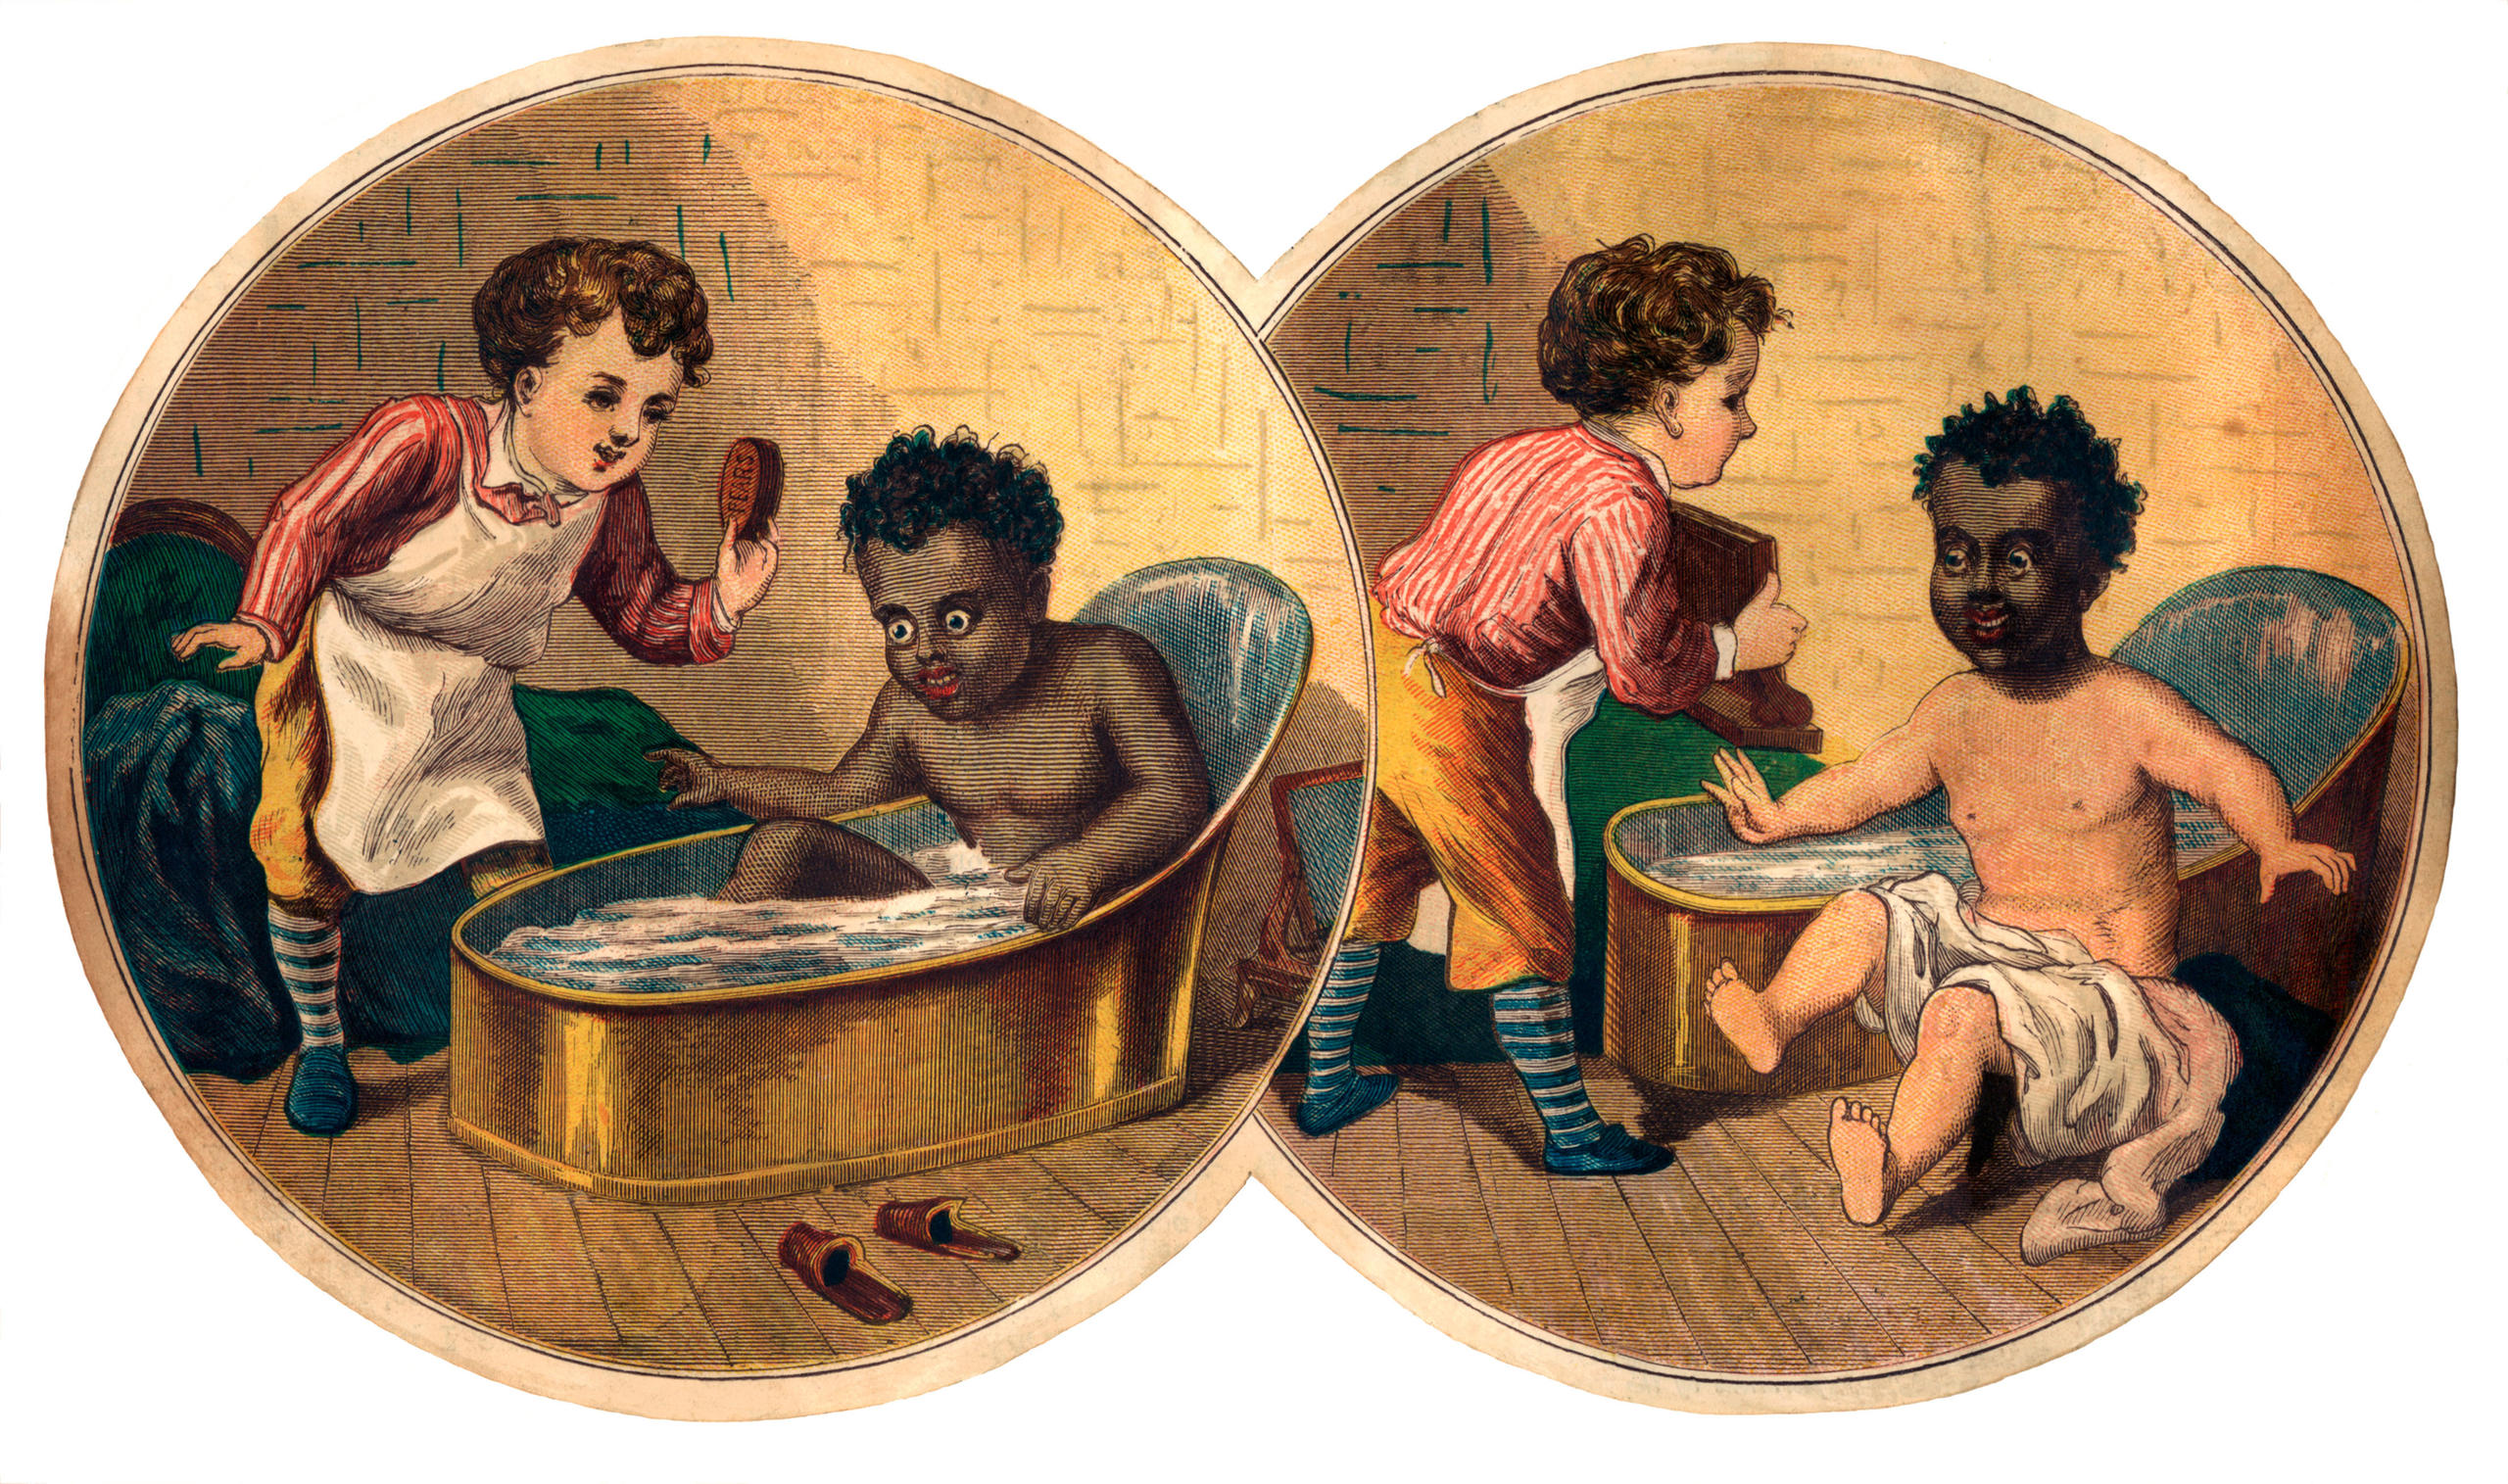 1800s advert for soap, illustrating the Victorian attitude to race issues